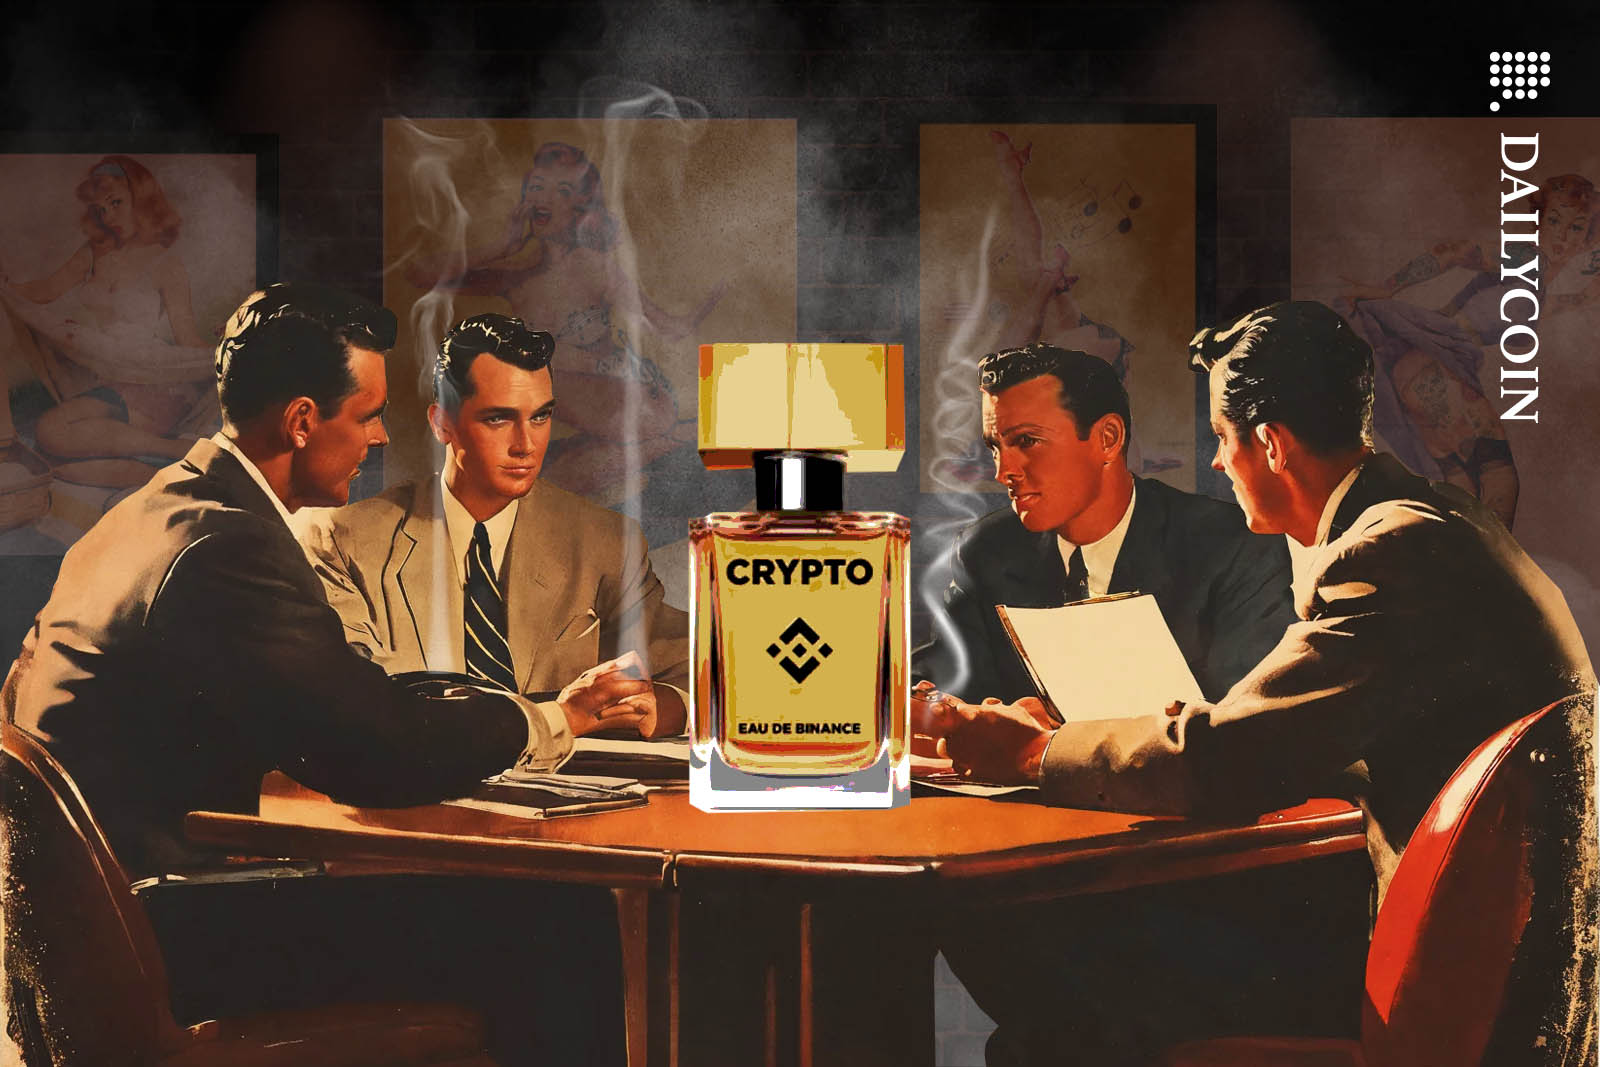 Four advertising executives sitting around a large bottle of Binance Crypto parfume in a cigarette smoke filled room.